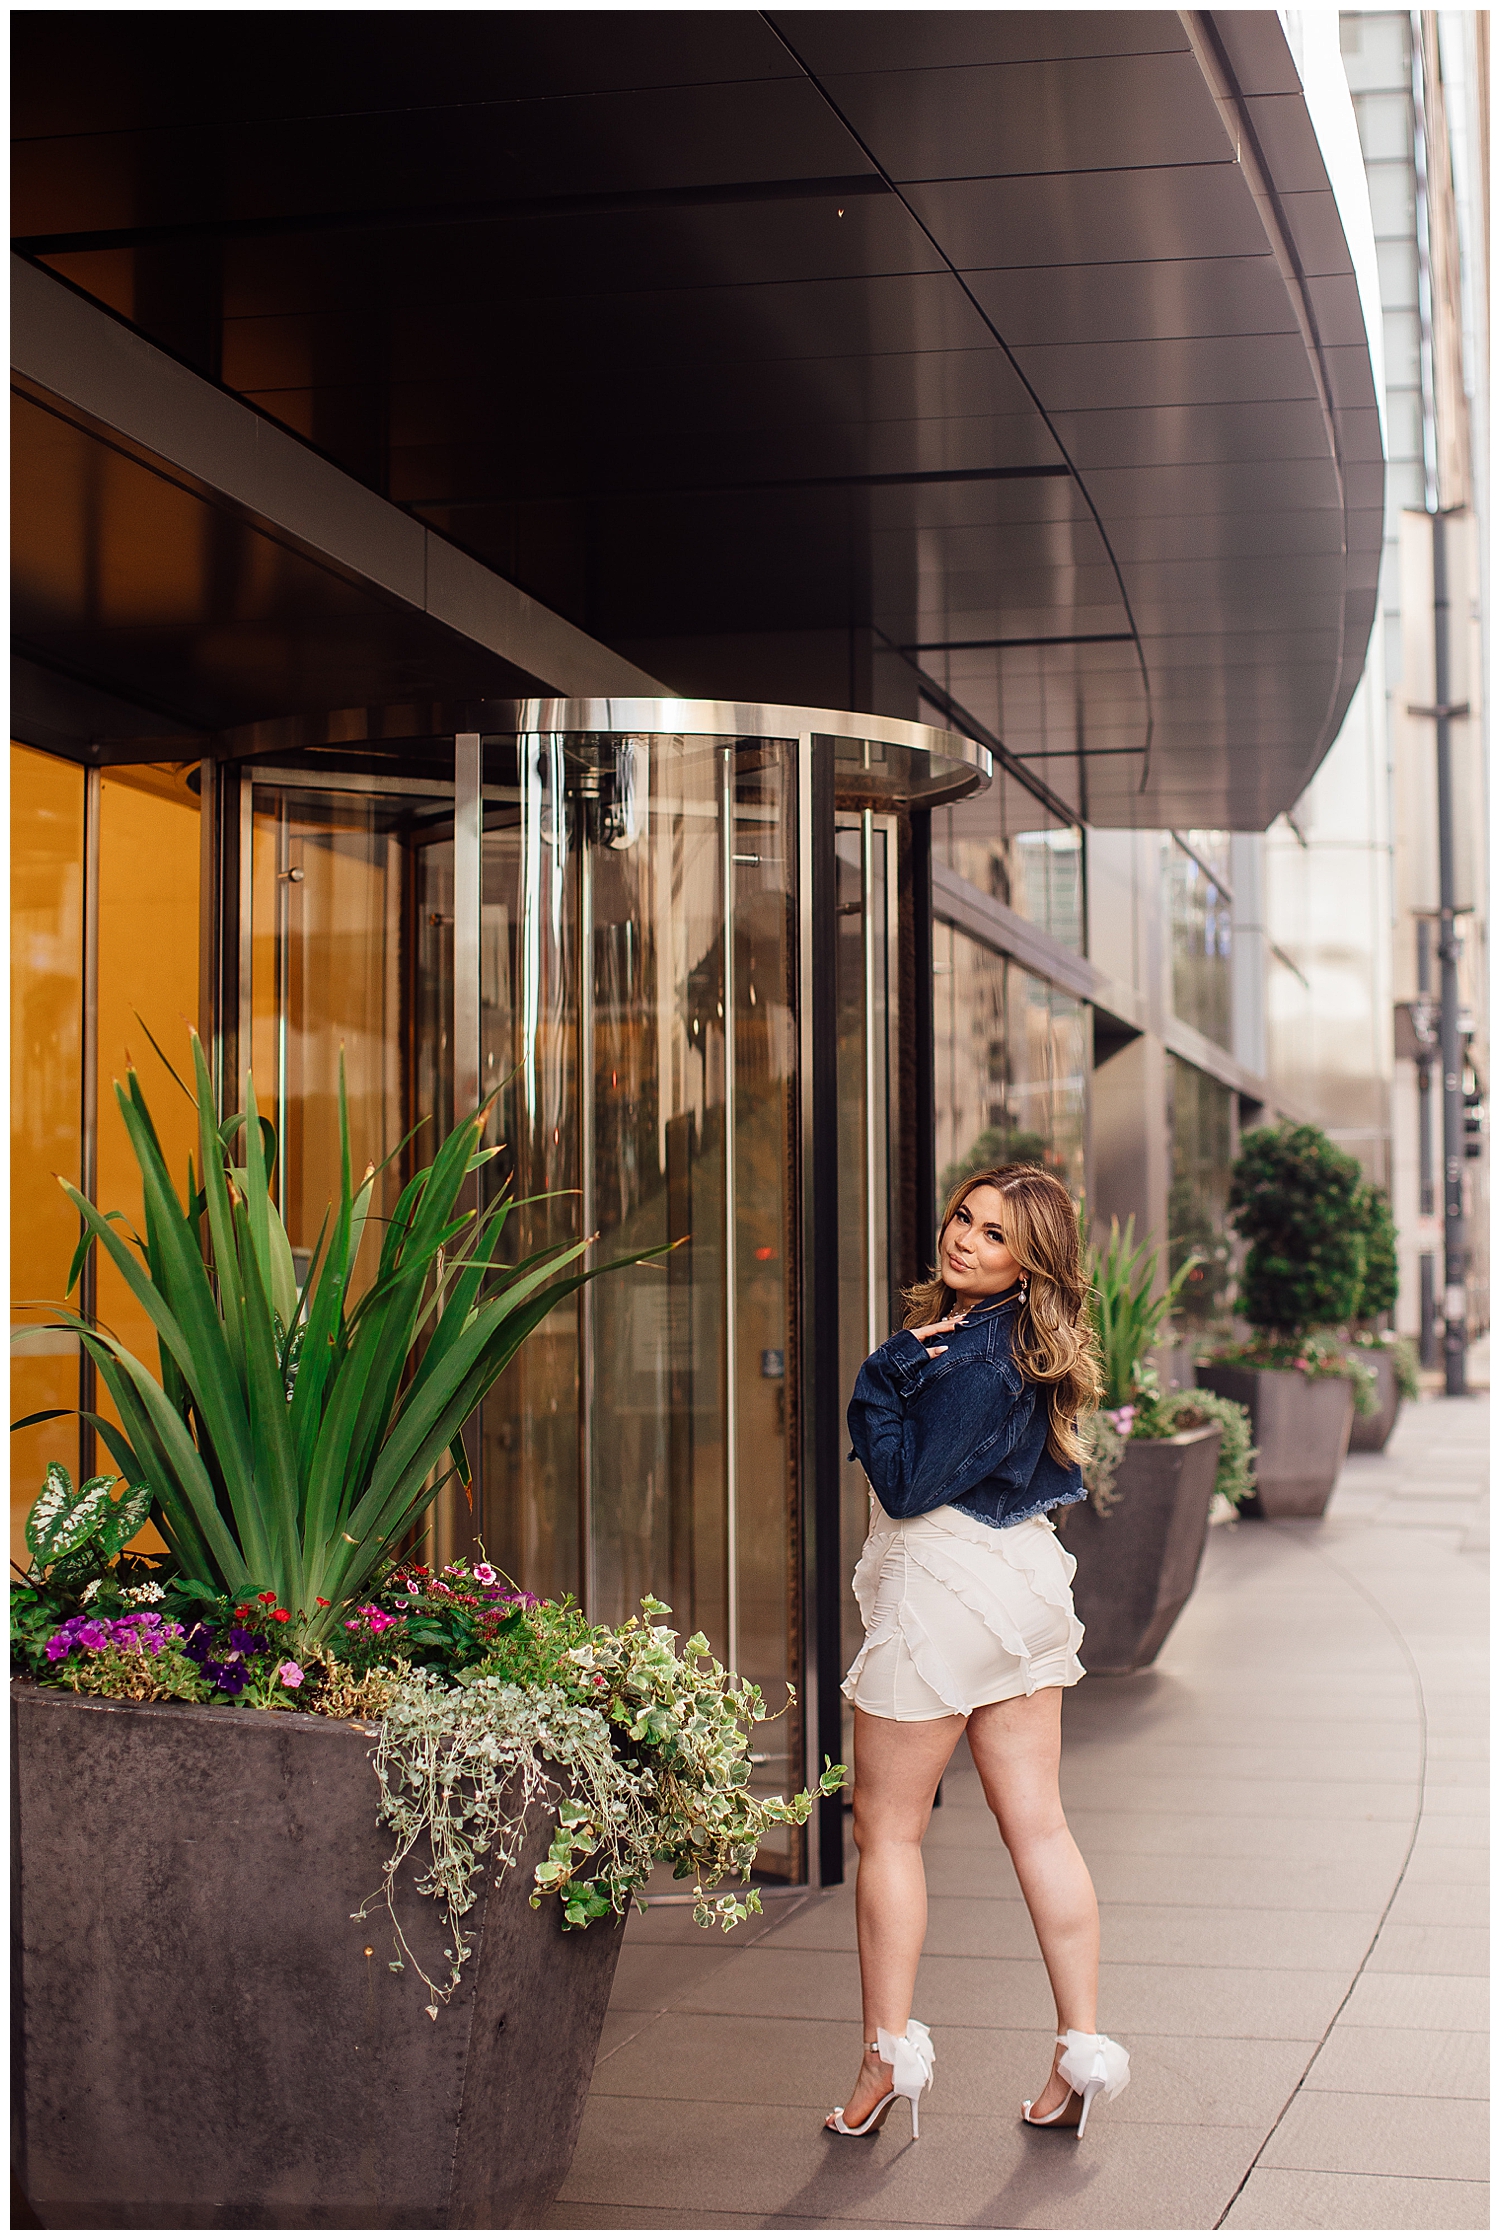 Houston downtown senior session with girl in white dress and denim jacket in front of glass windows